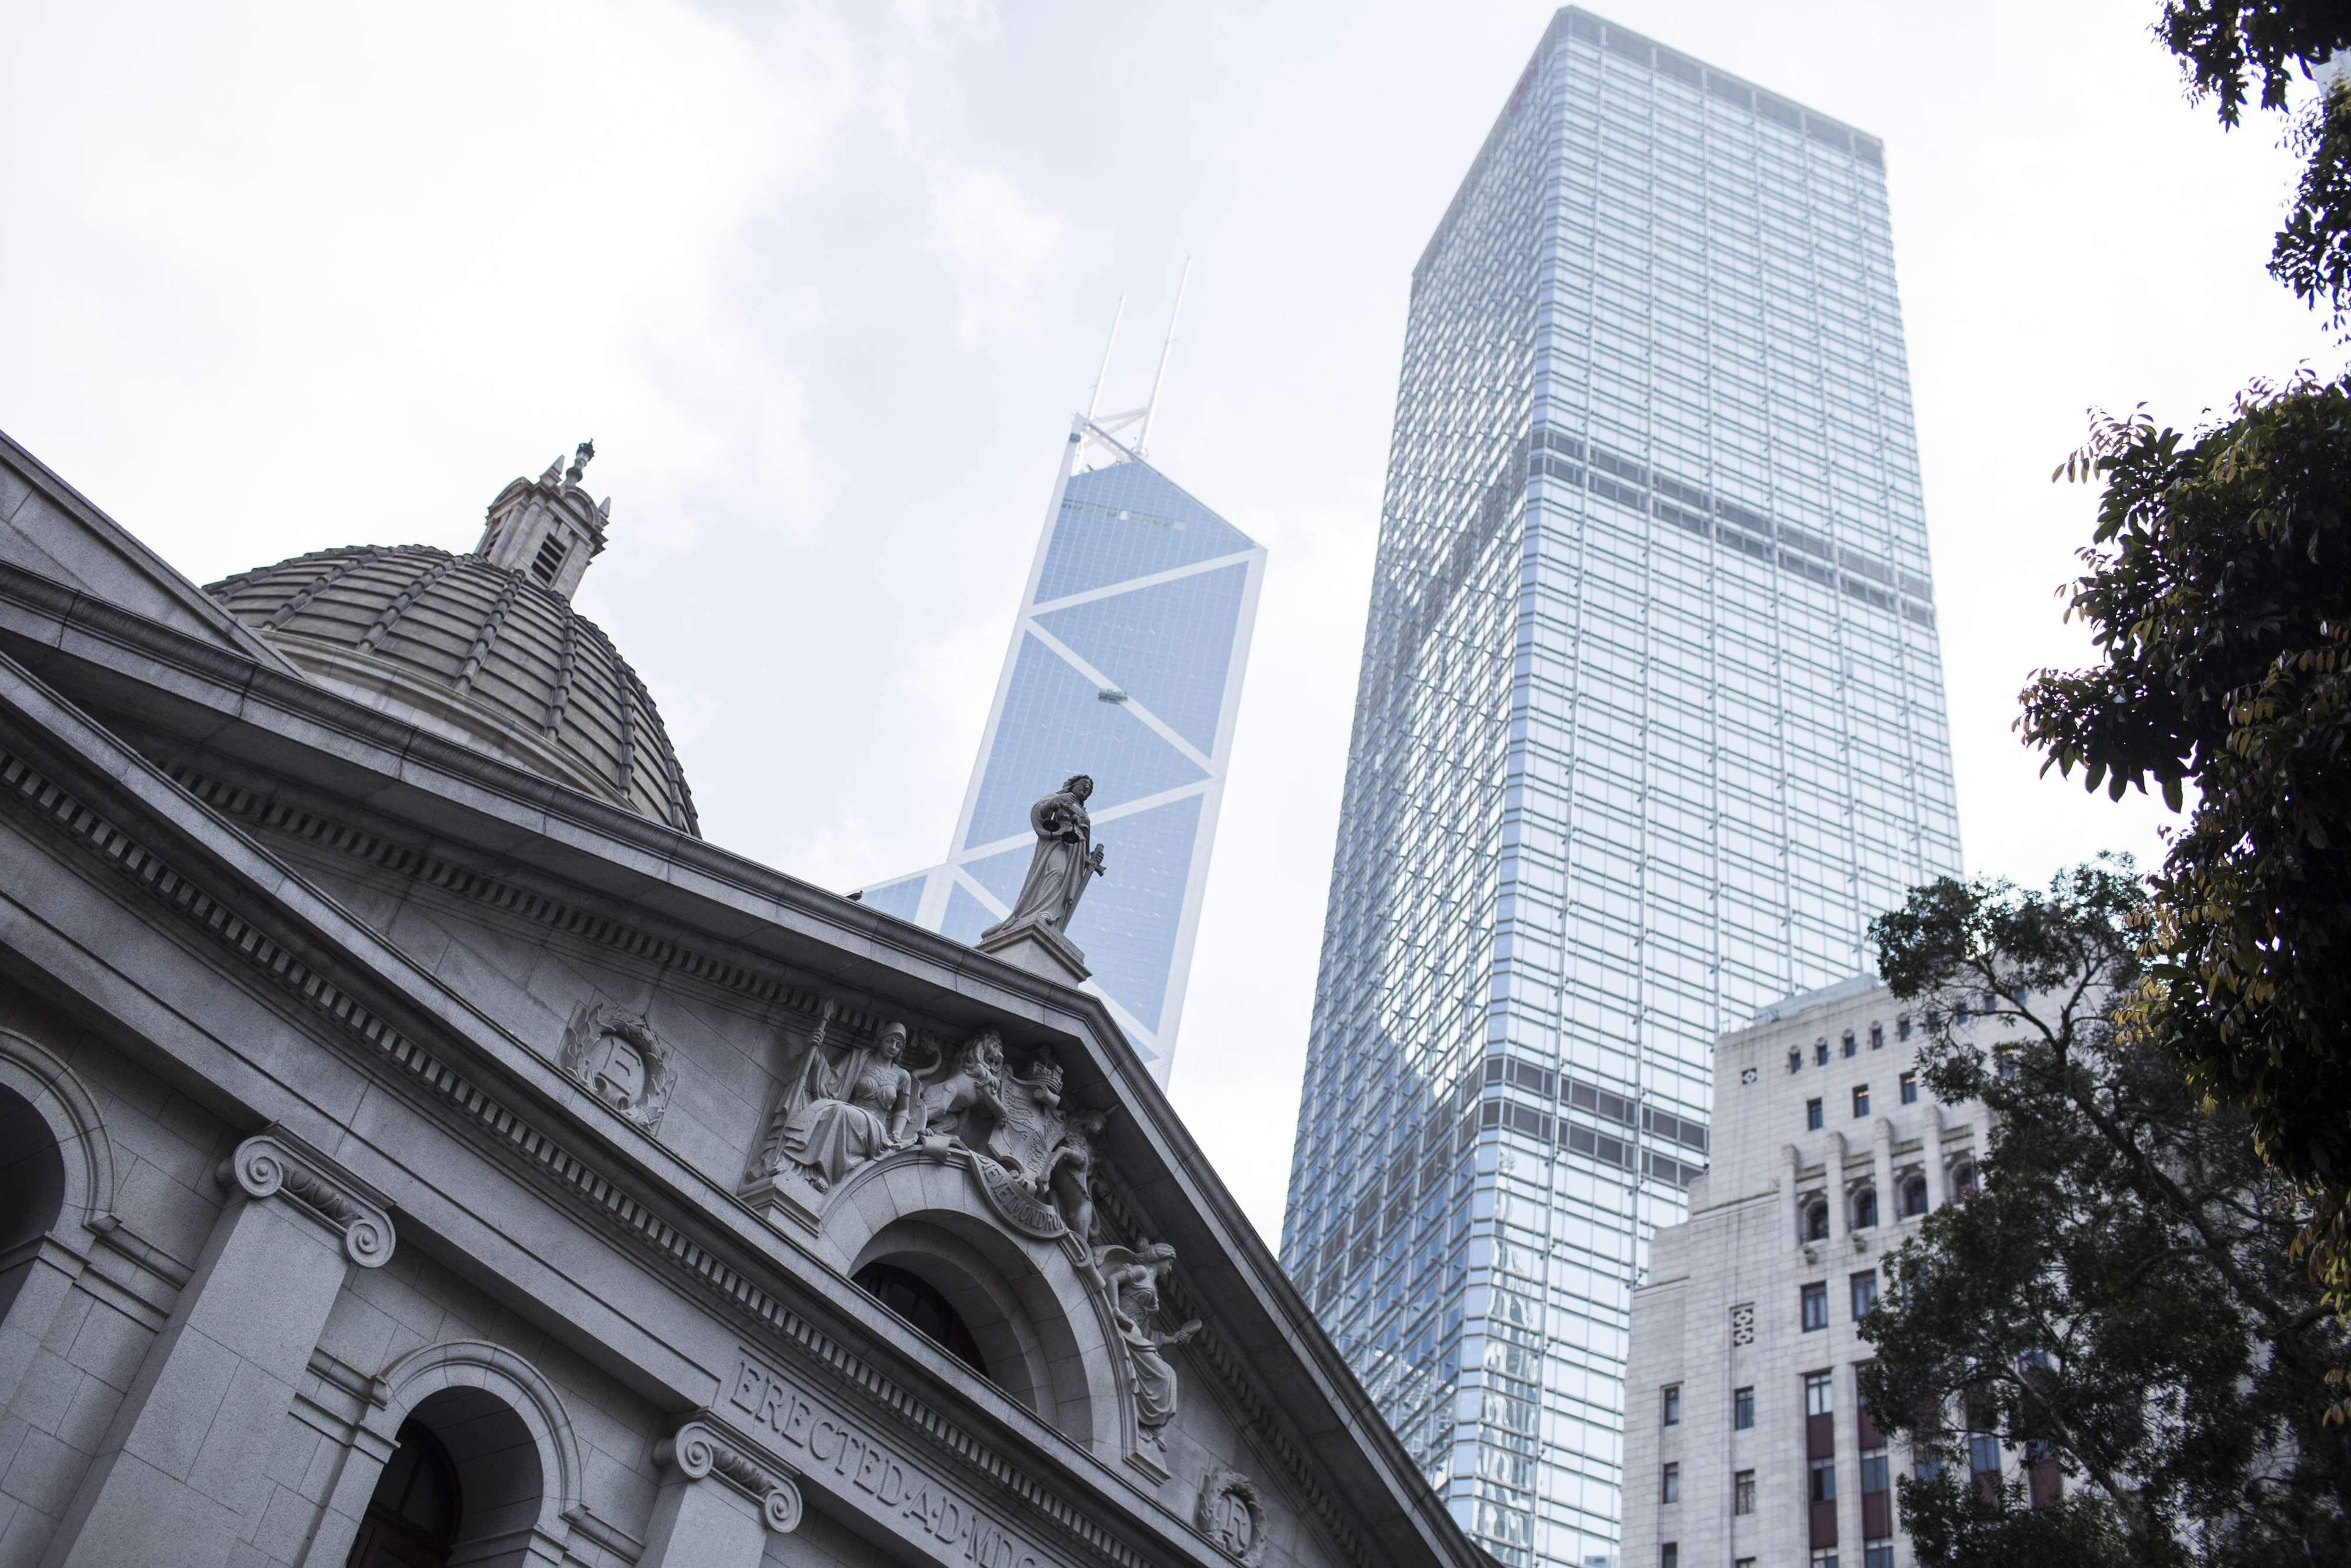 The Court of Final Appeal building in Central. The jurisprudence developed here in Hong Kong epitomises the versatility and resilience of the common law. Photo: Bloomberg